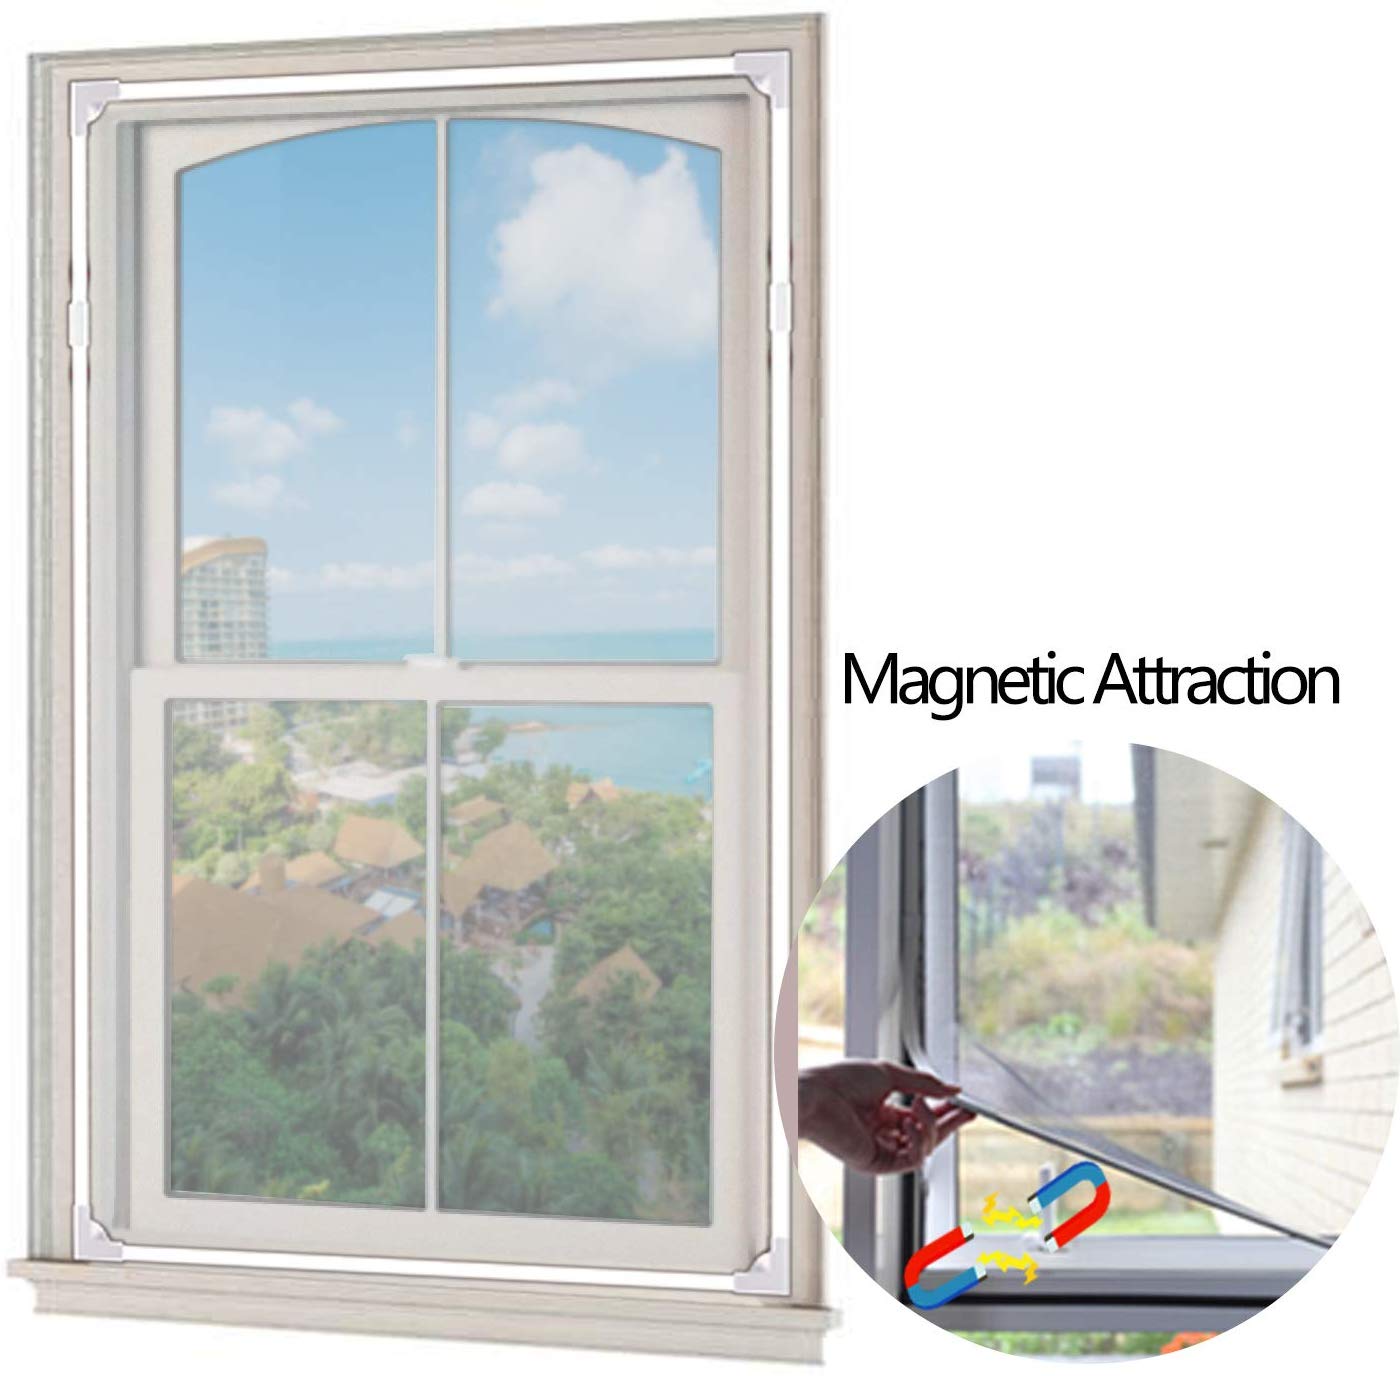 A view of a large window

Description automatically generated